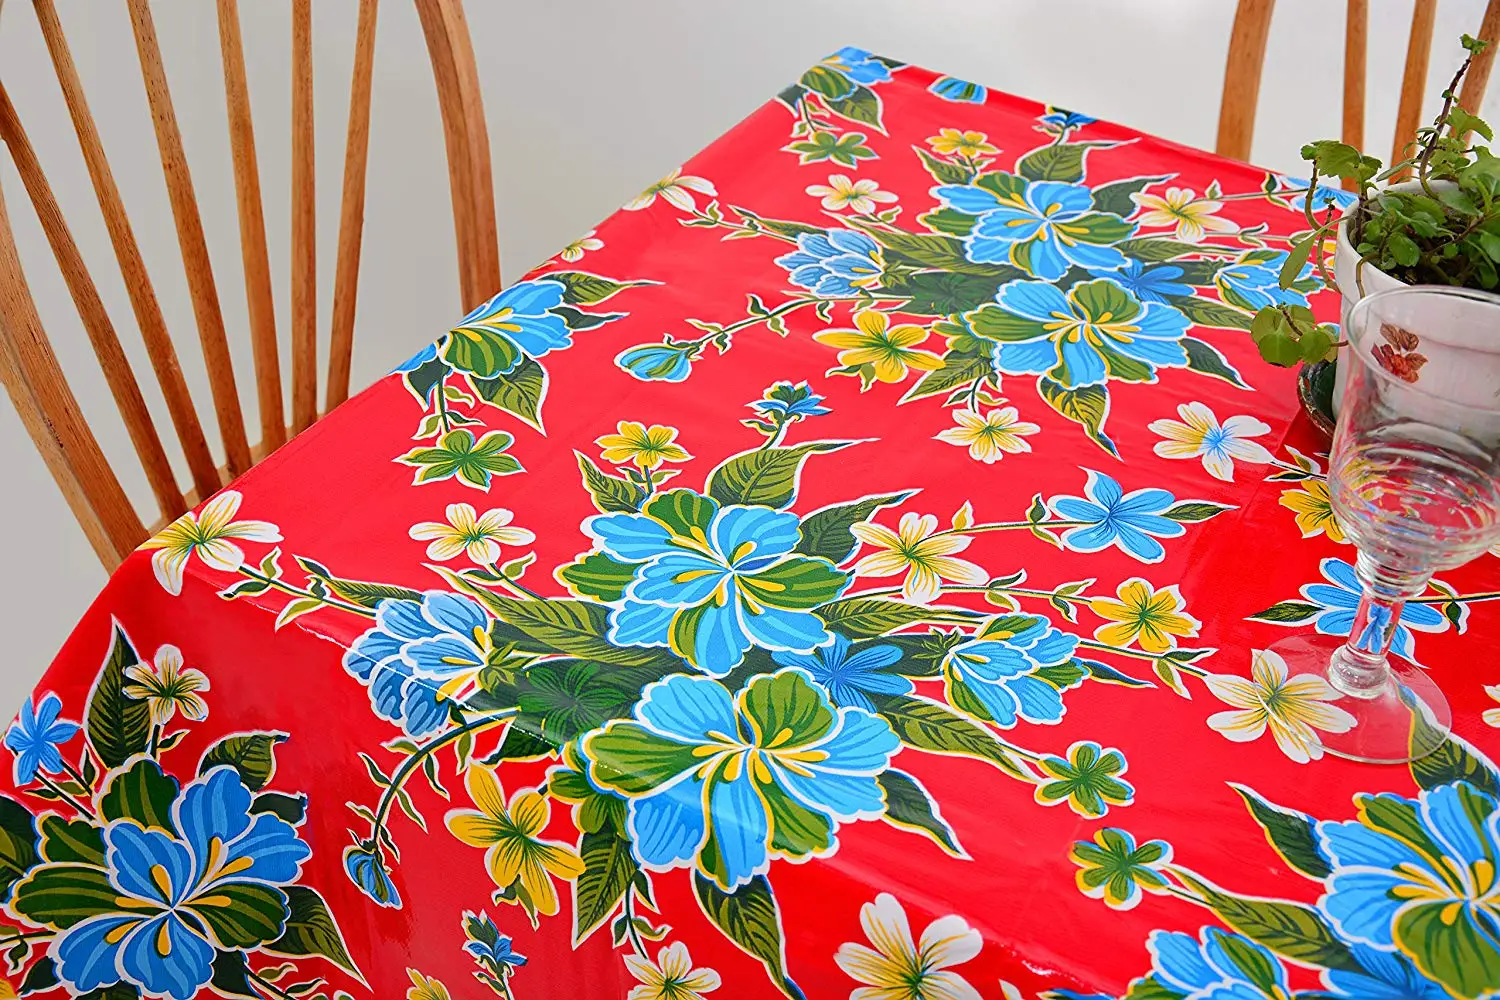 Wonderful oilcloth tablecloth oval Cheap Oilcloth Tablecloth Oval Find Deals On Line At Alibaba Com